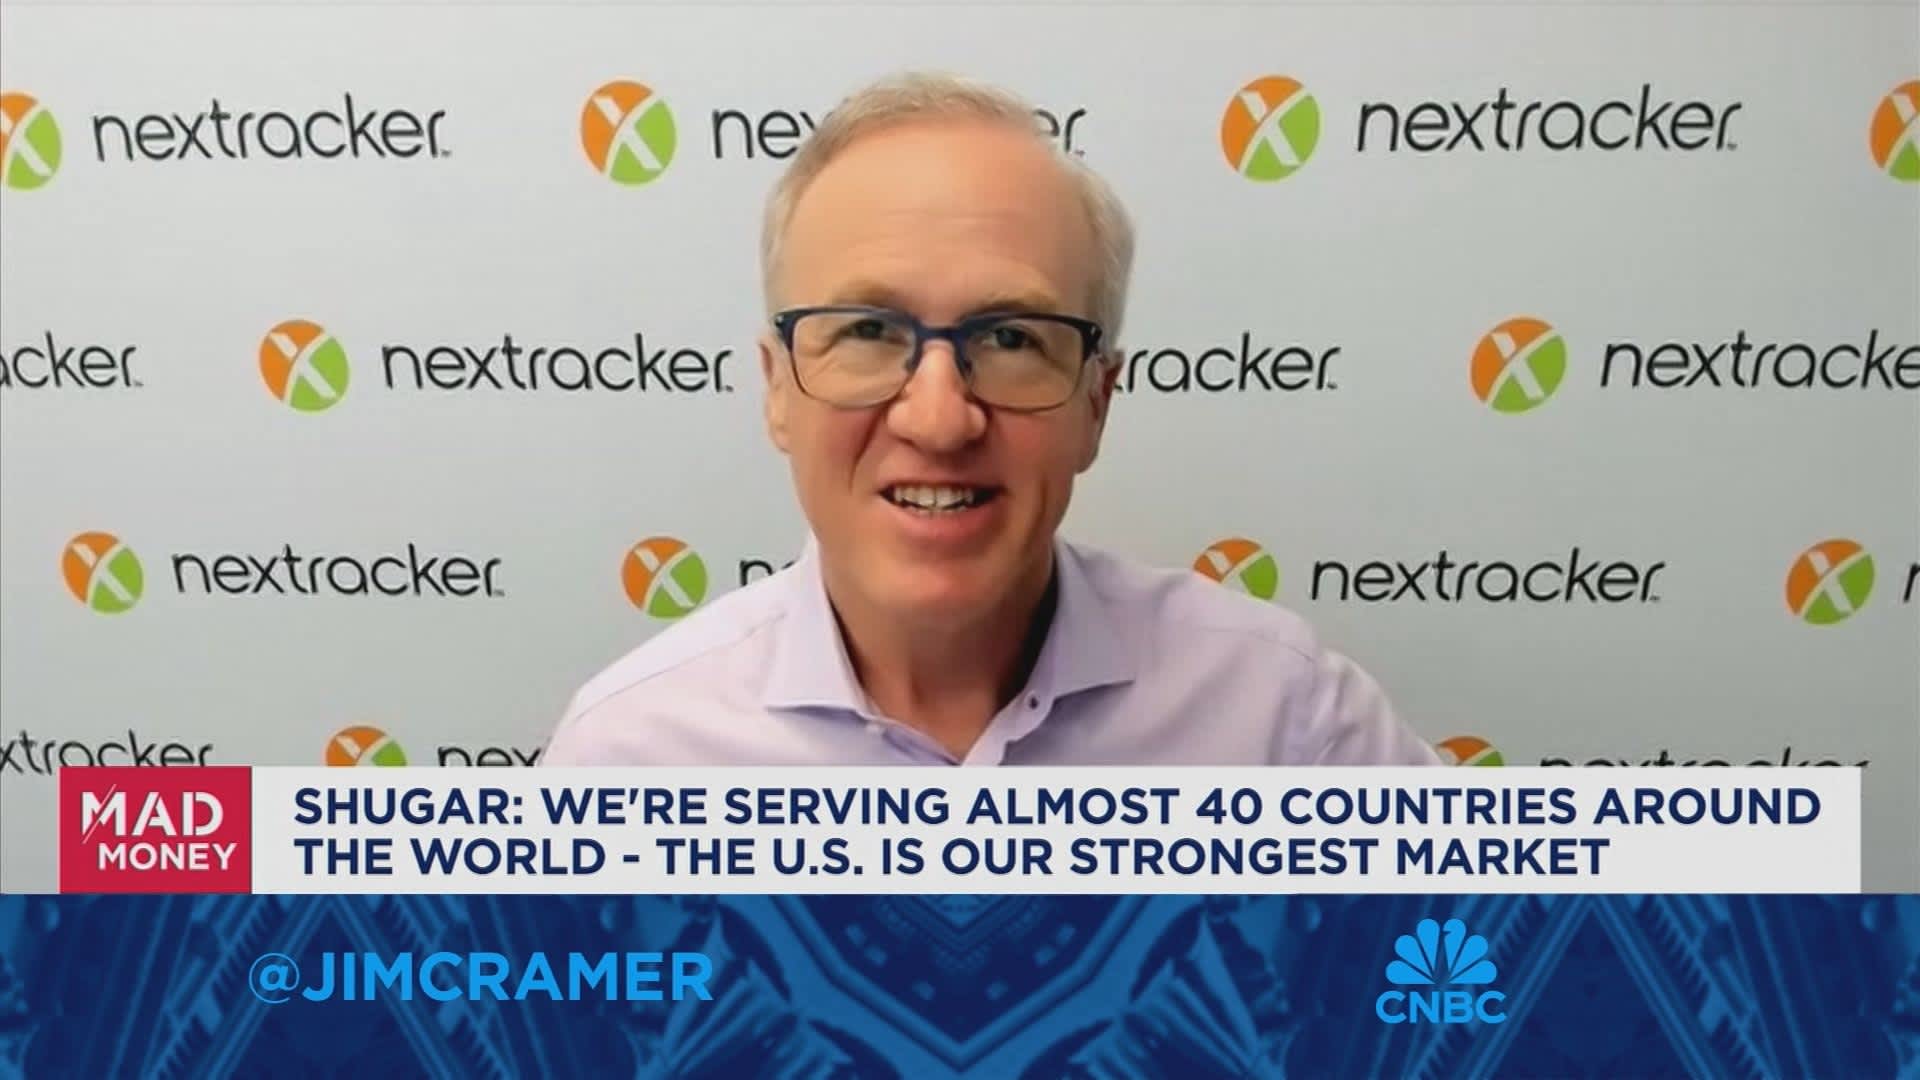 The U.S. is our strongest market, says Nextracker CEO Dan Shugar